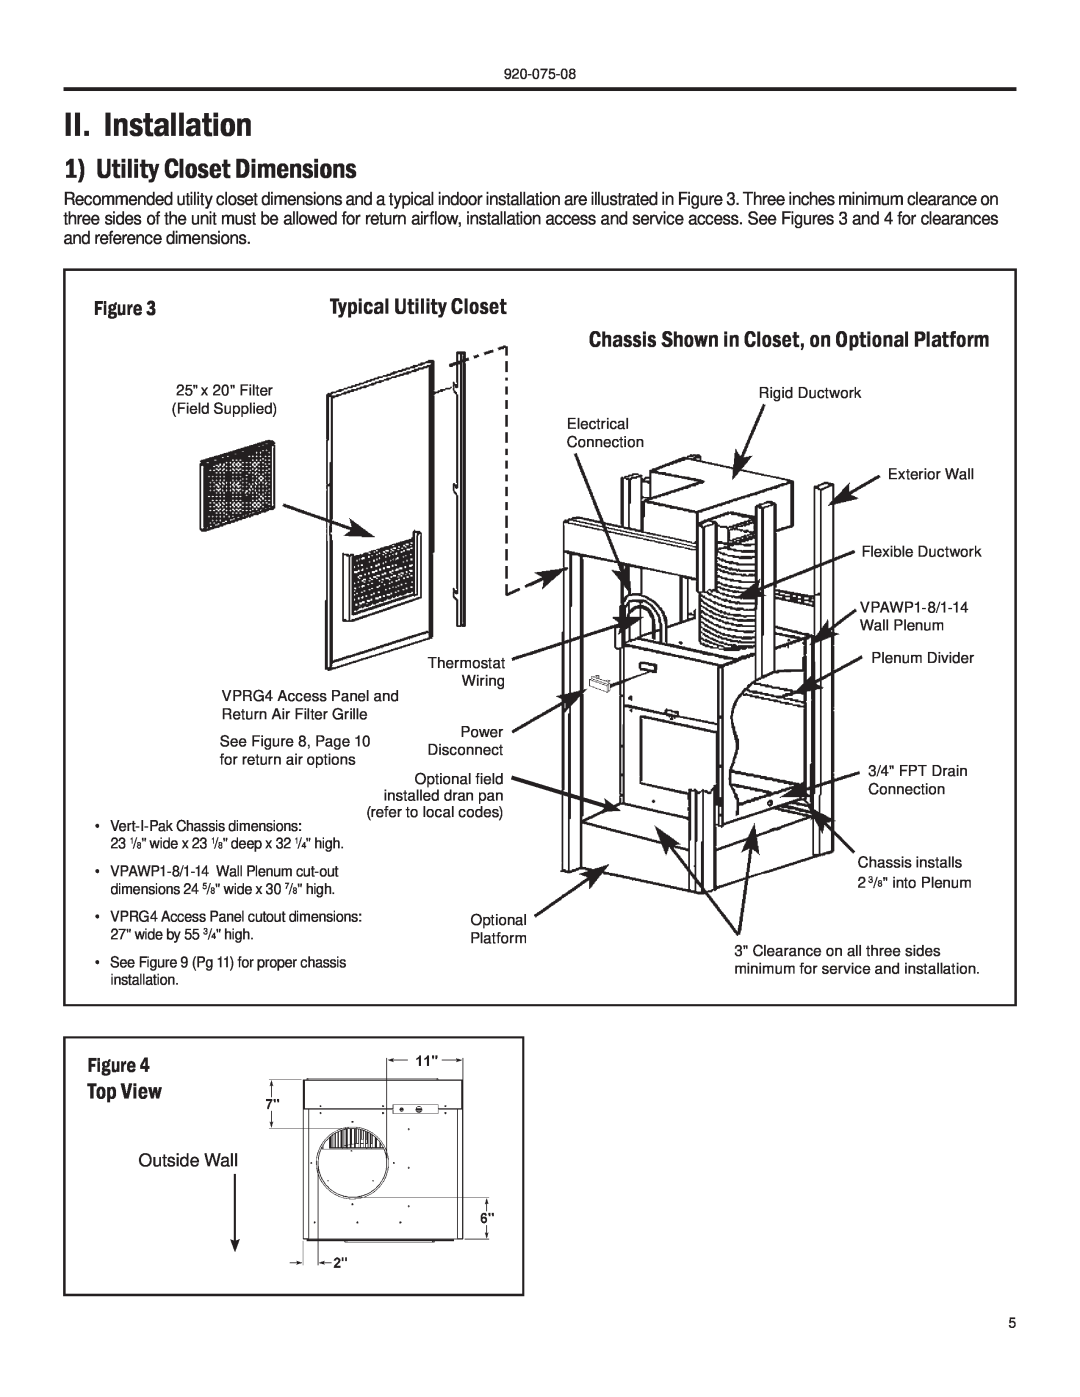 Friedrich A-SERIES manual II. Installation, Utility Closet Dimensions, Typical Utility Closet, Top View, Figure 